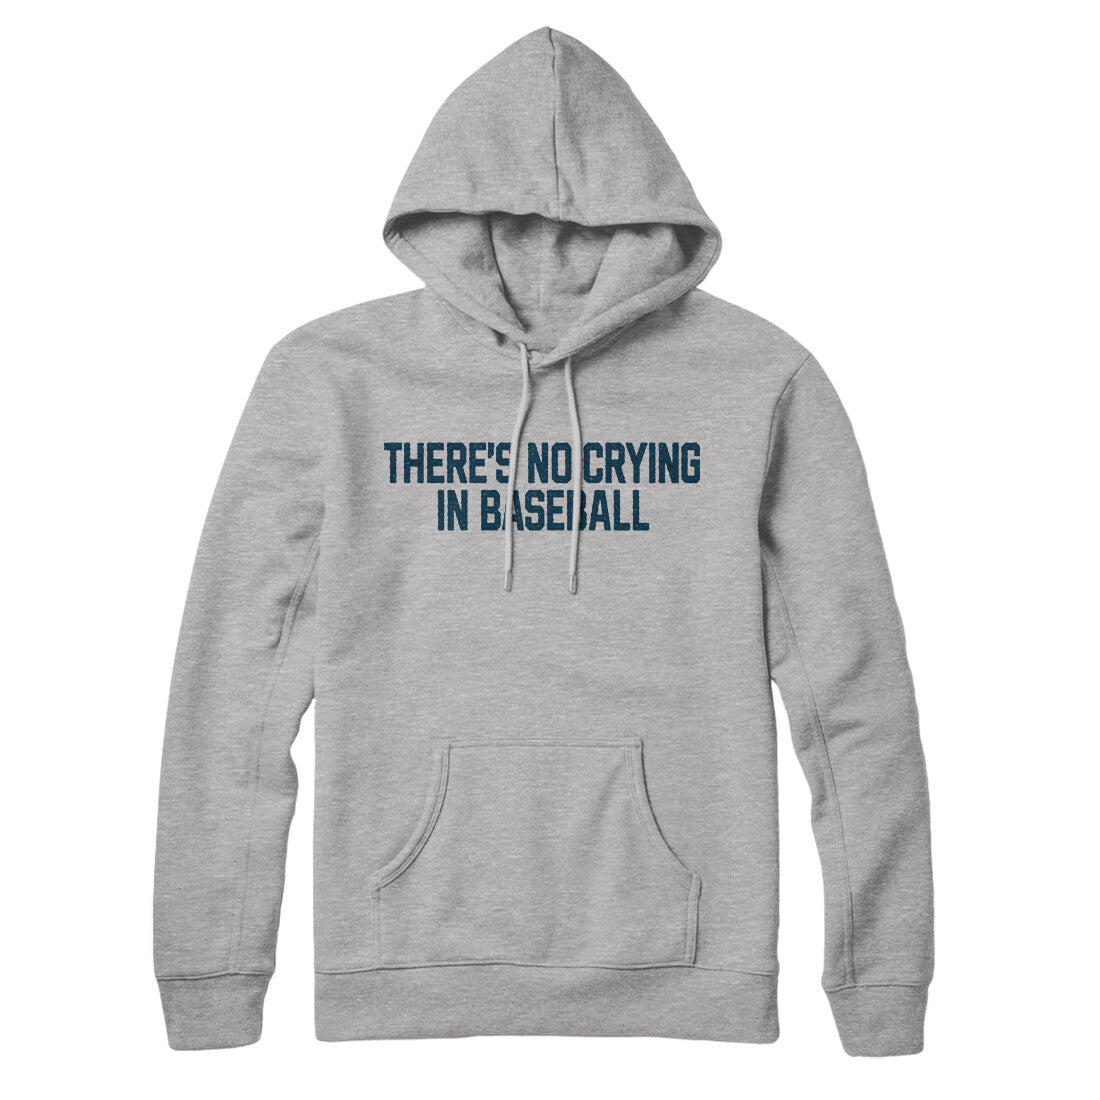 There's No Crying in Baseball in Heather Grey Color